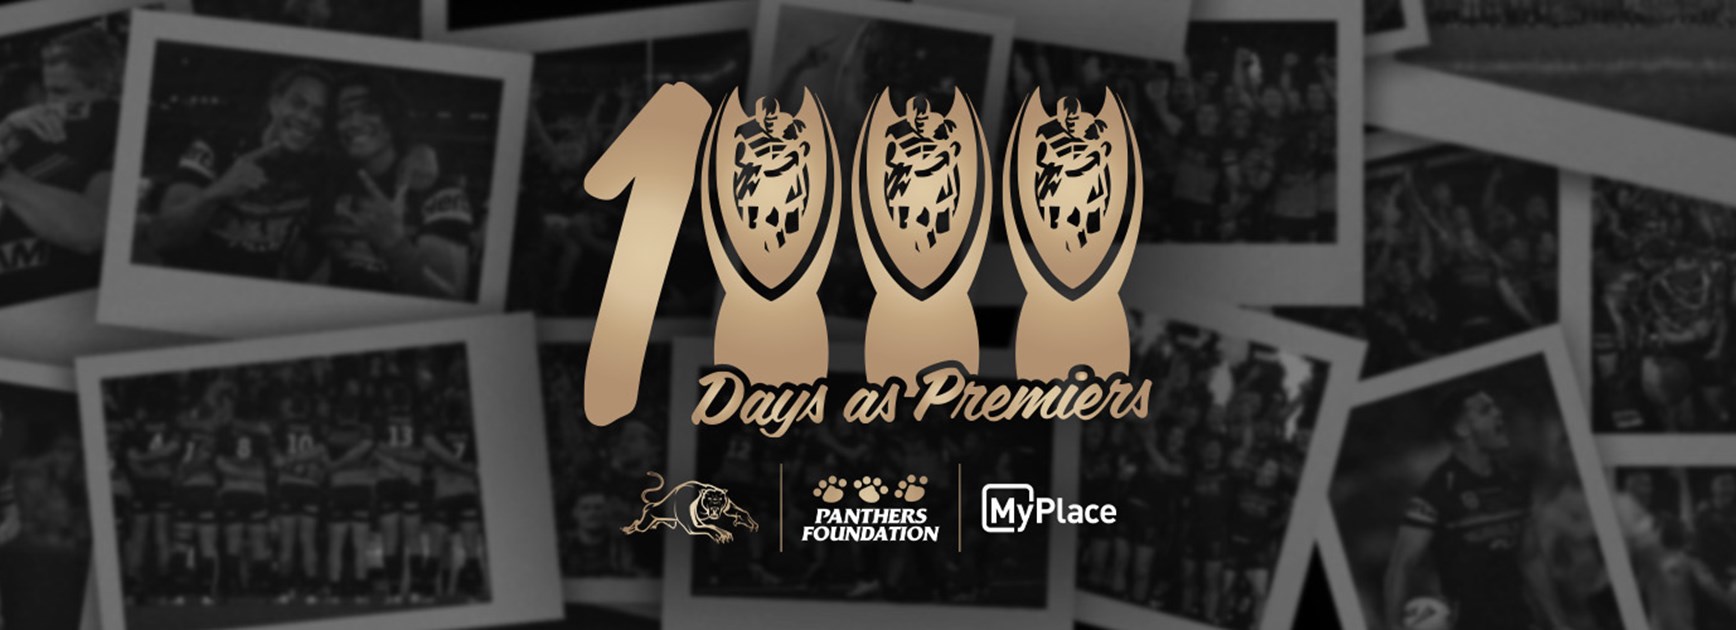 Panthers Foundation launches 1000 Days as Premiers campaign